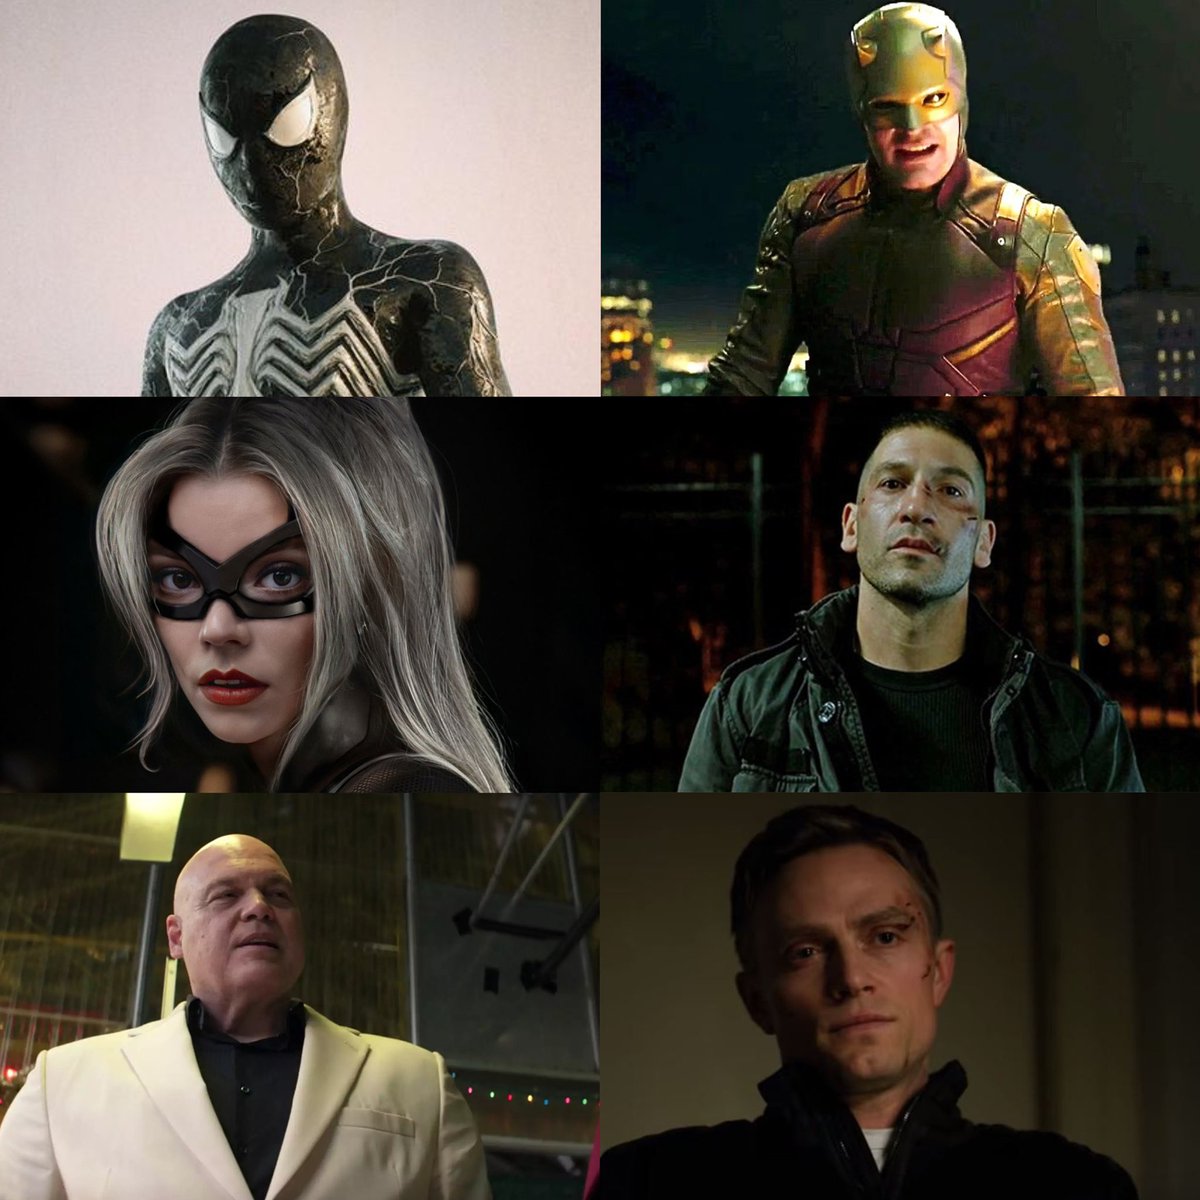 RT @blurayangel: Imagine this is the cast for Spider-Man 4 https://t.co/Sb79cxgMT7